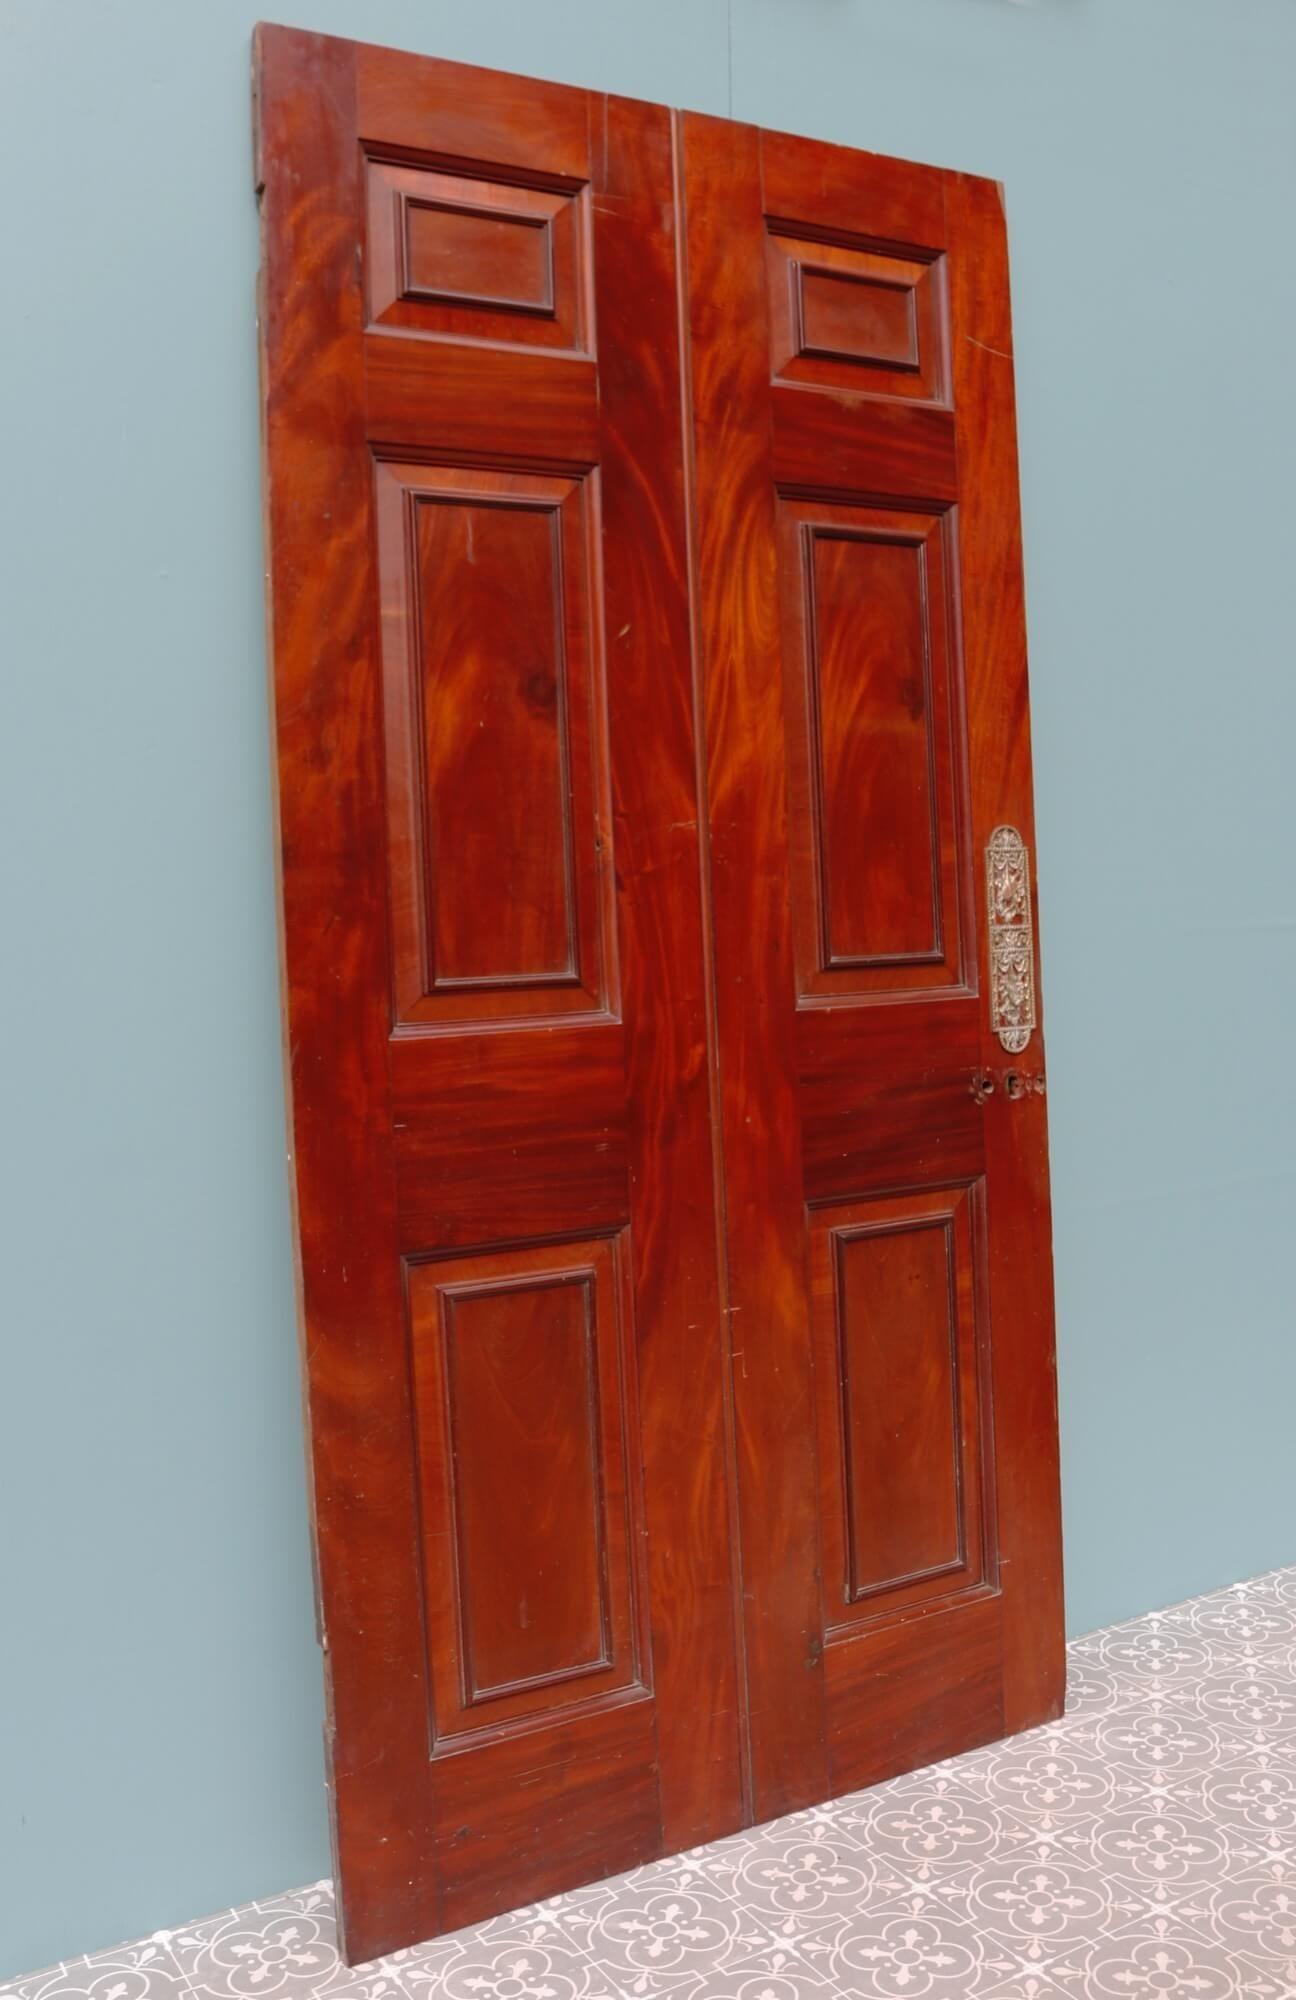 This handsome Georgian internal door dates as far back as the late 1700s. Made from mahogany, it has a rich colour and stunning flame Mahogany wood grain, making for a beautiful interior door in a period property. To the front is mahogany, detailed